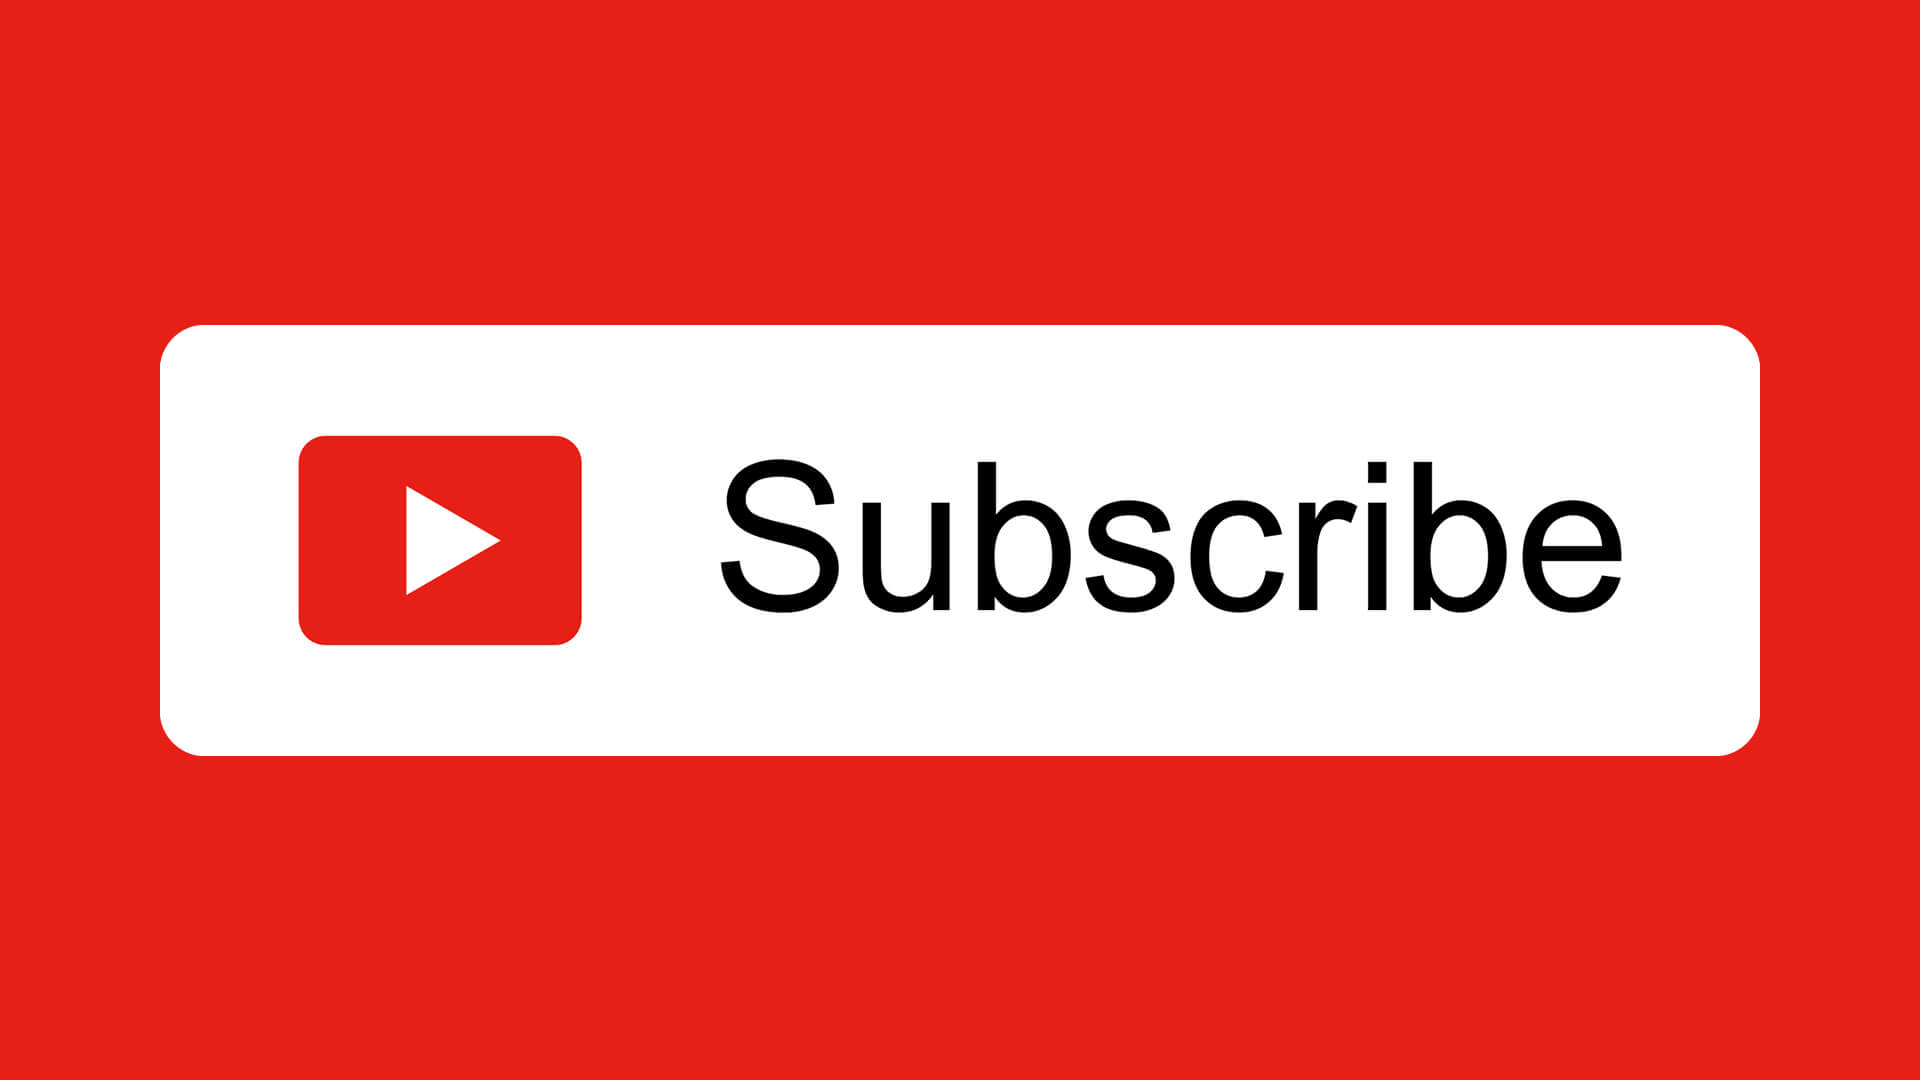 Free YouTube Subscribe Button Download Design Inspiration By AlfredoCreates 14